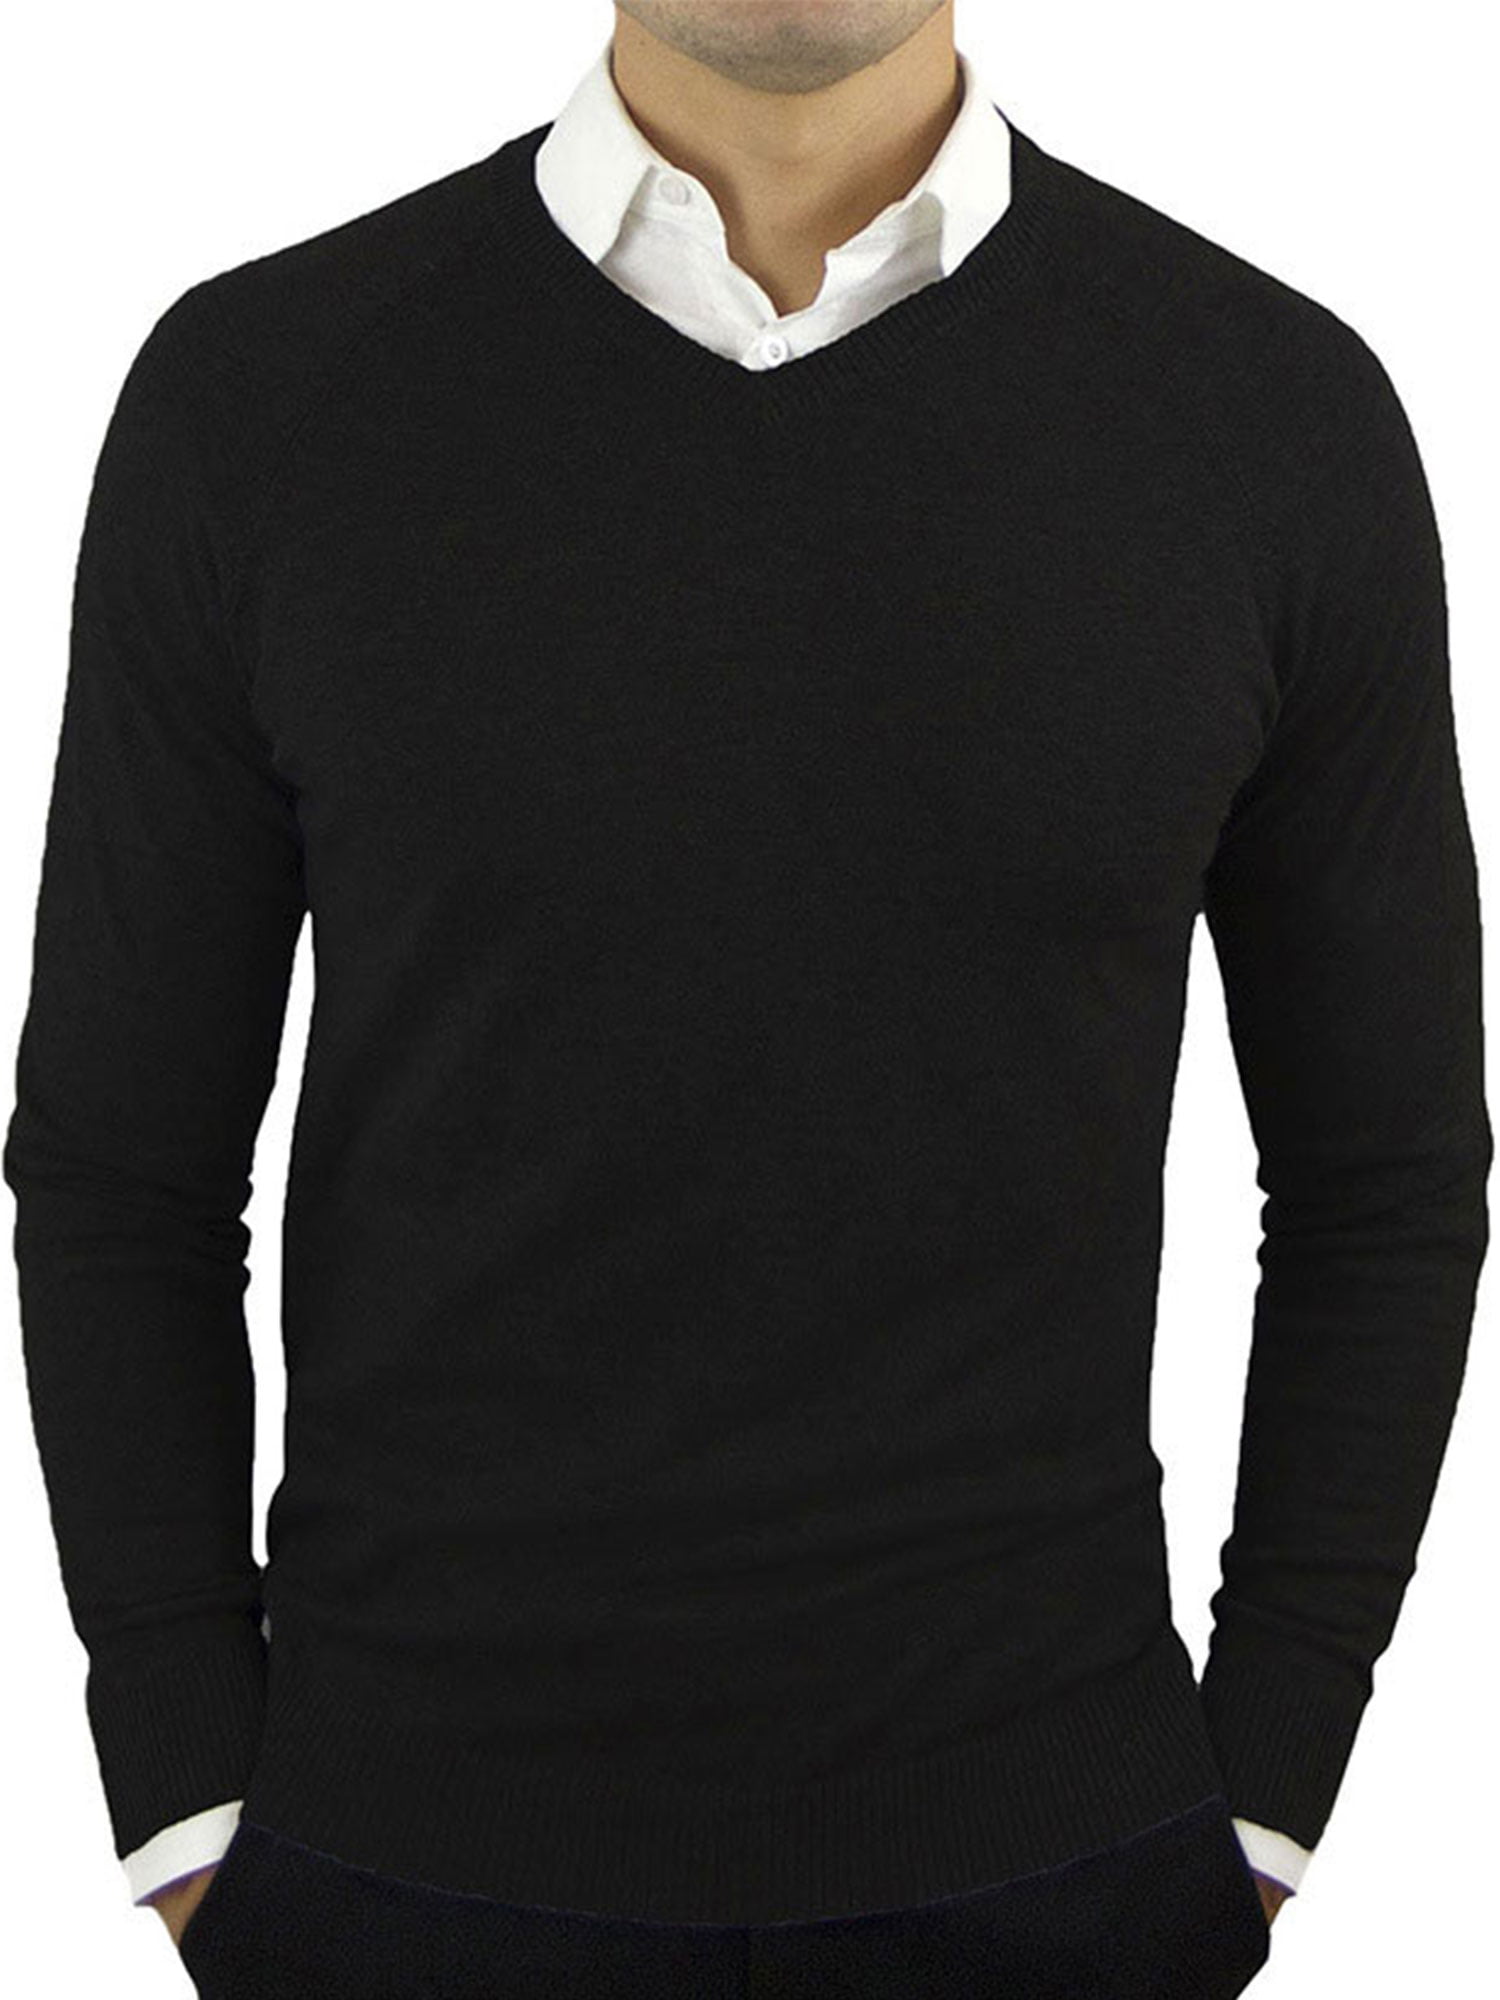 Generic Mens Casual V Neck Solid Pullover Jumper Sweater Tops